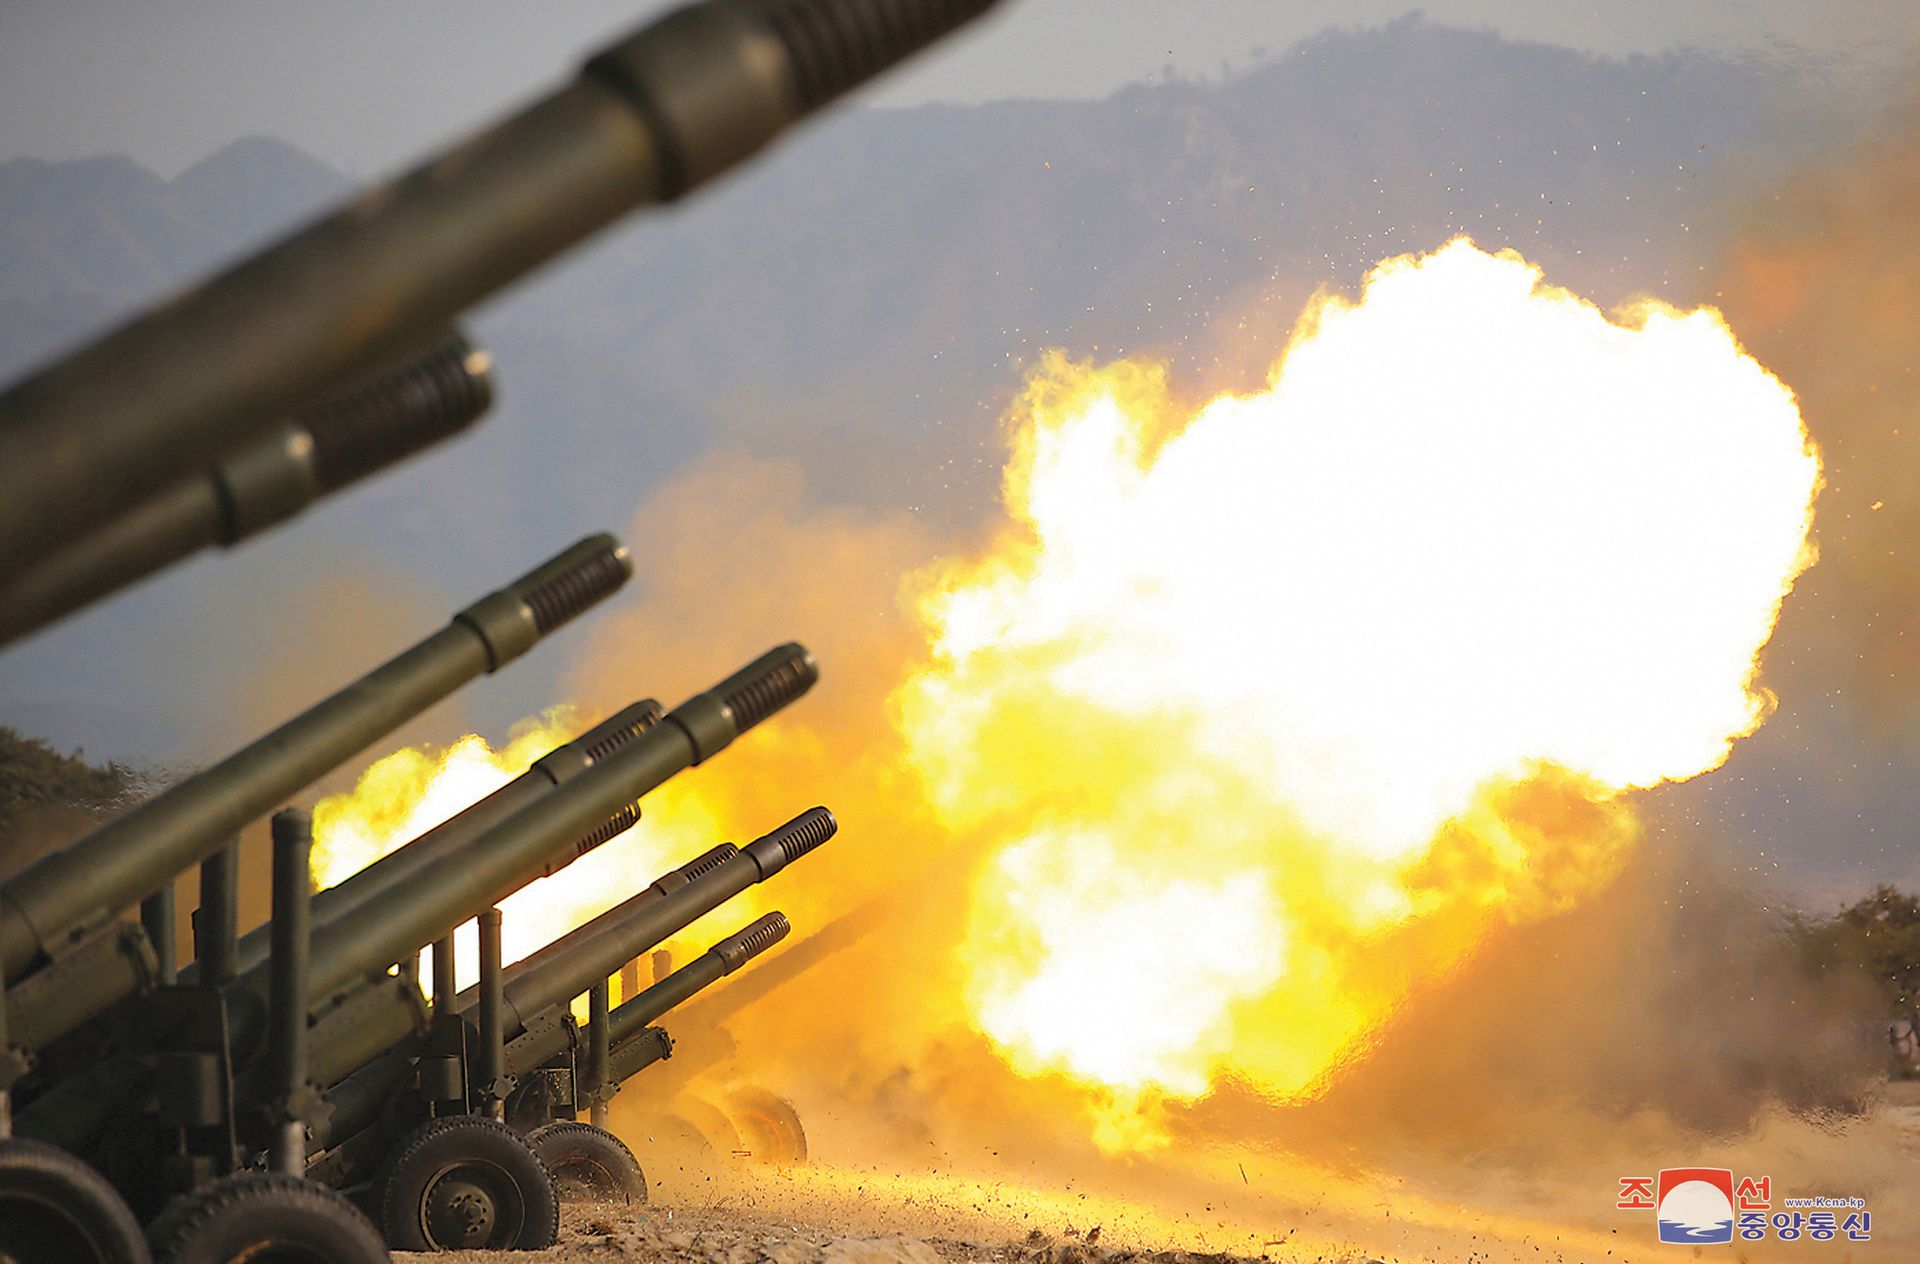 An artillery fire competition between the Korean People's Army's artillery units